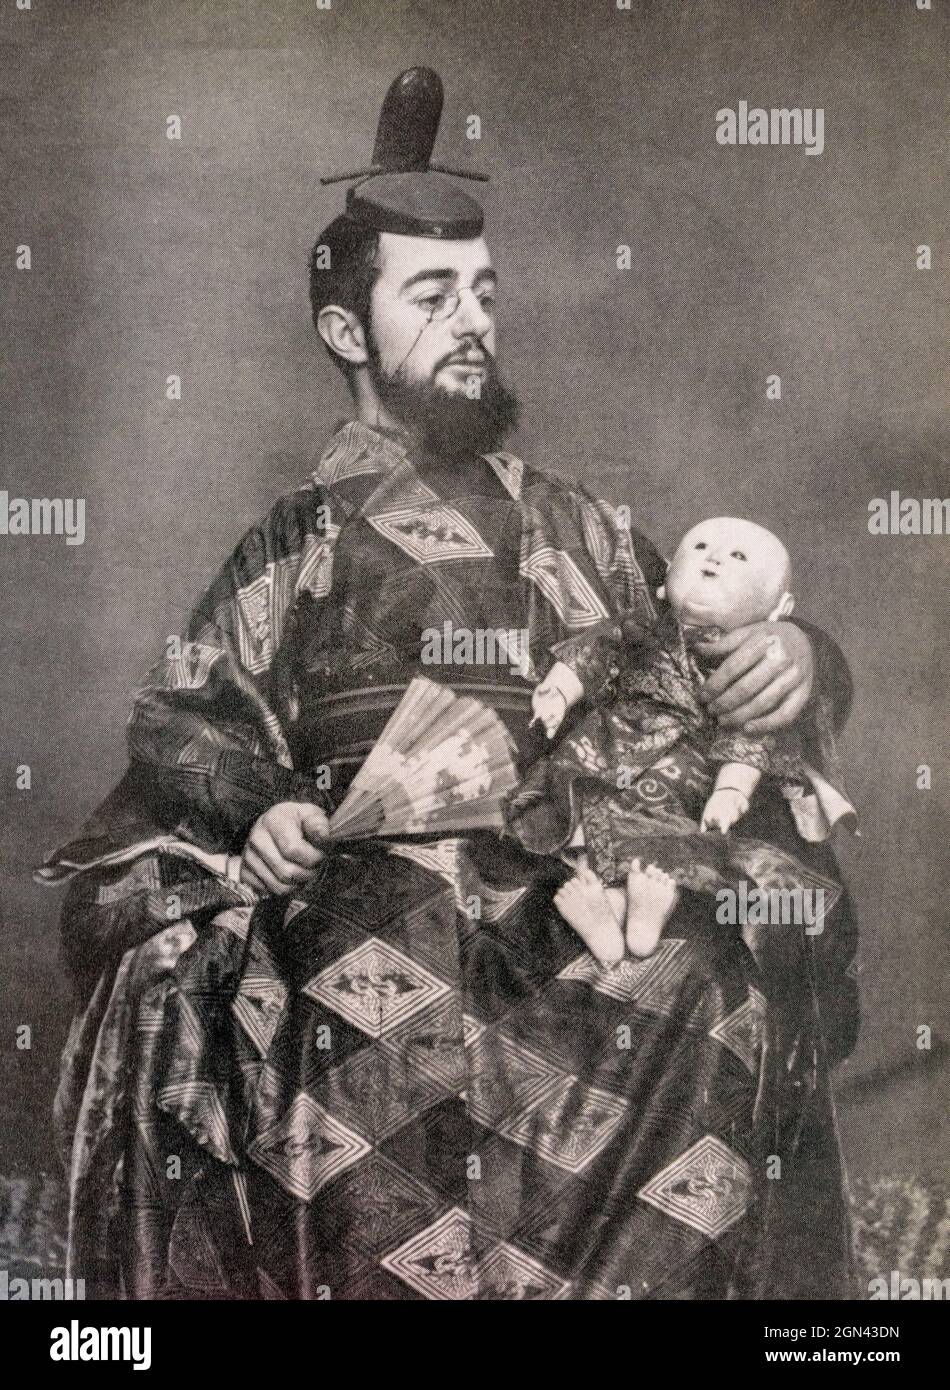 Toulouse-Lautrec dressed as a Japanese and holding a fan and a doll.  After a photograph by French photographer Maurice Guibert, 1856 - 1922, a friend of Toulouse-Lautrec. Henri Toulouse-Lautrec, 1864 - 1901, French Post-Impressionist artist. Stock Photo